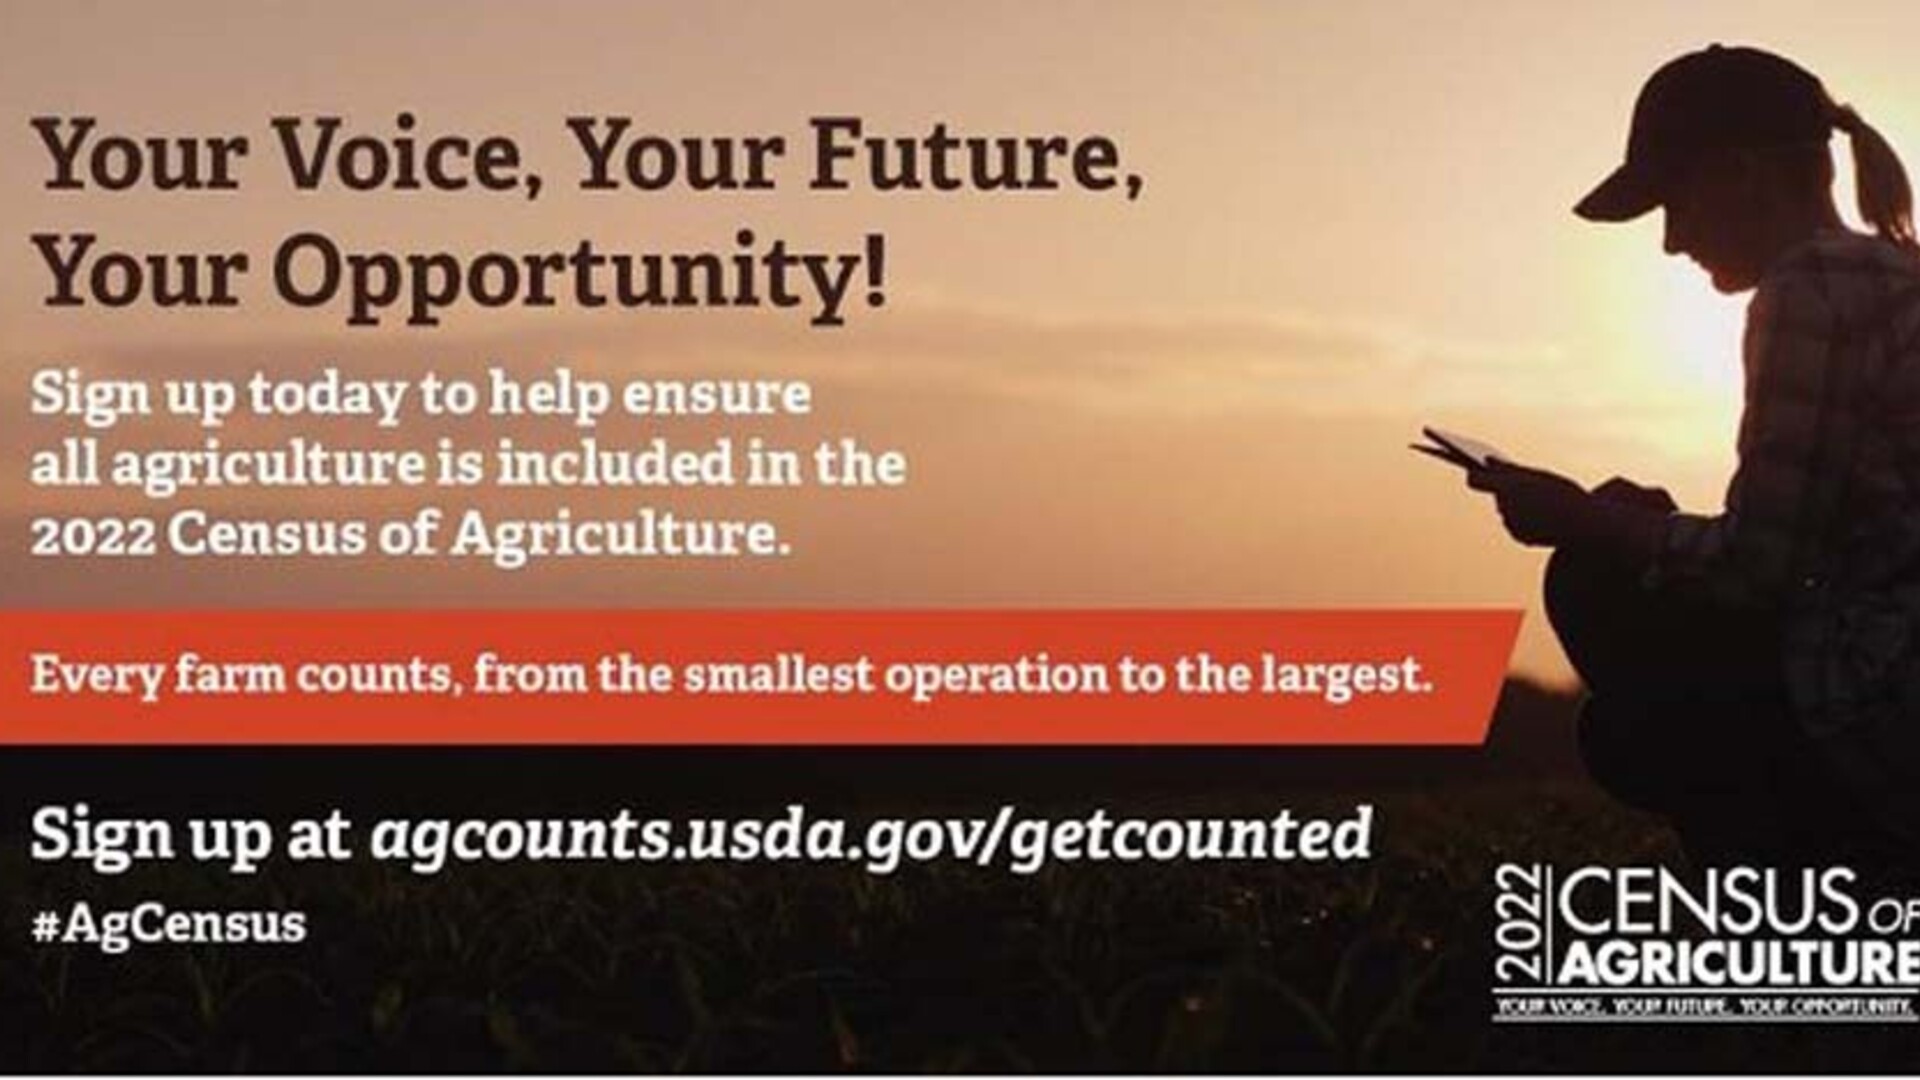 Still Time To Be Counted in Census of Agriculture